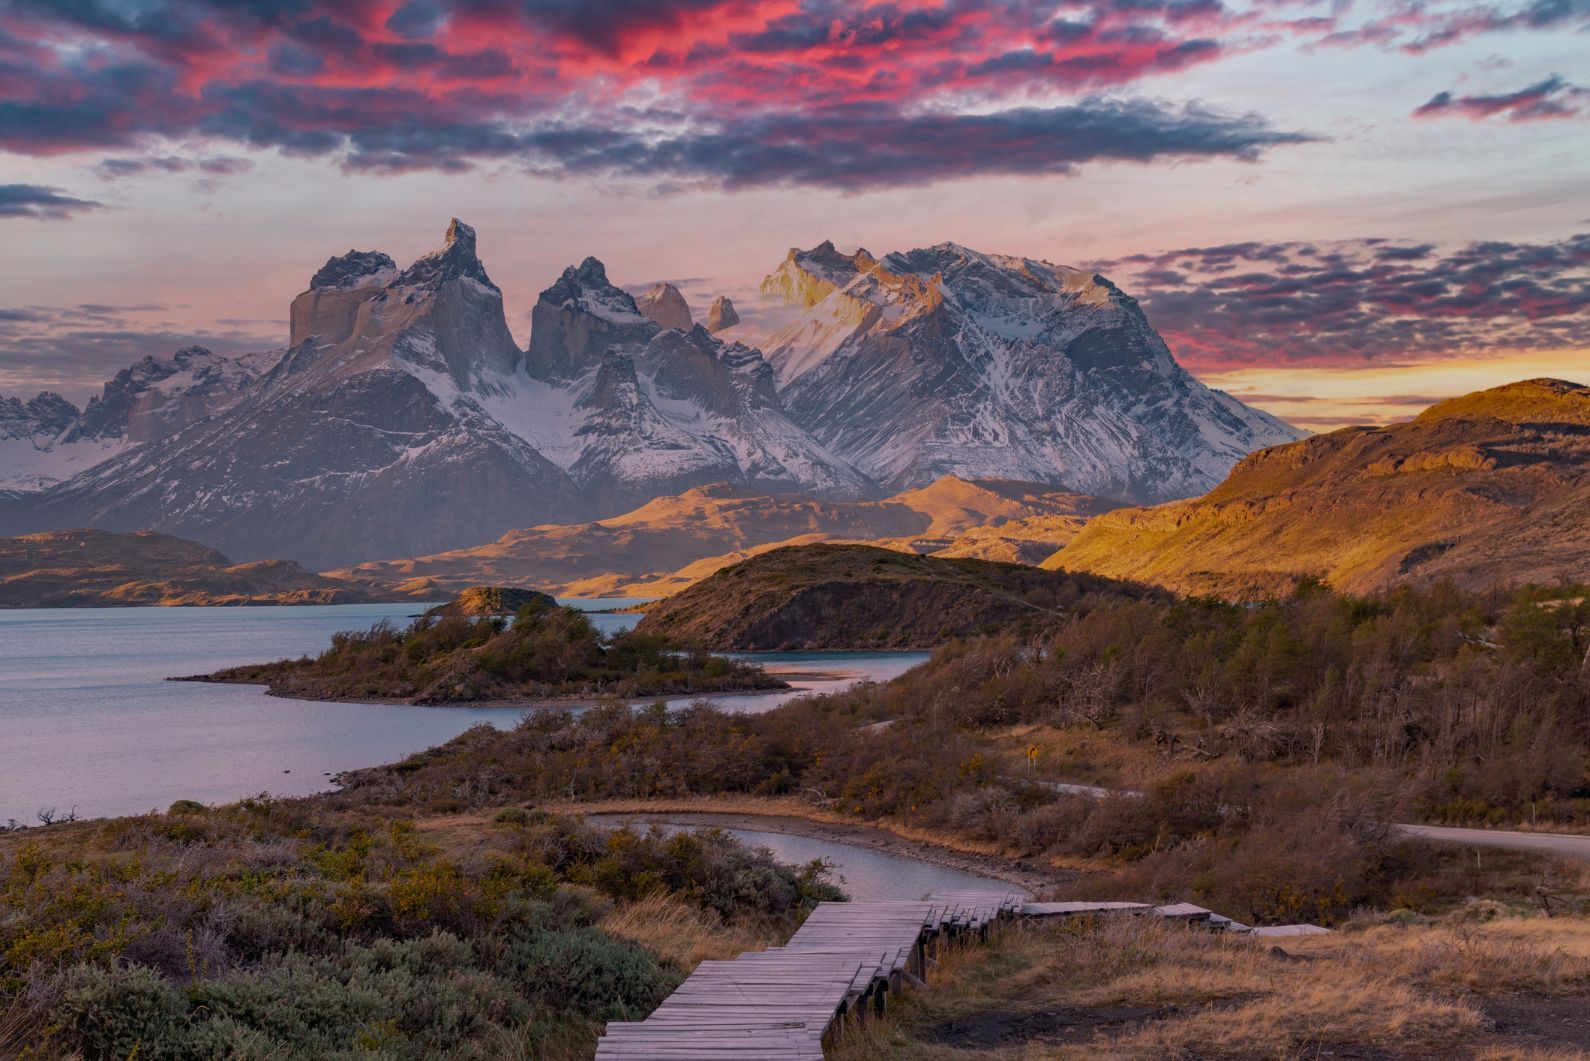 The Route of Parks: The 2,800km Hiking Trail Through Patagonia